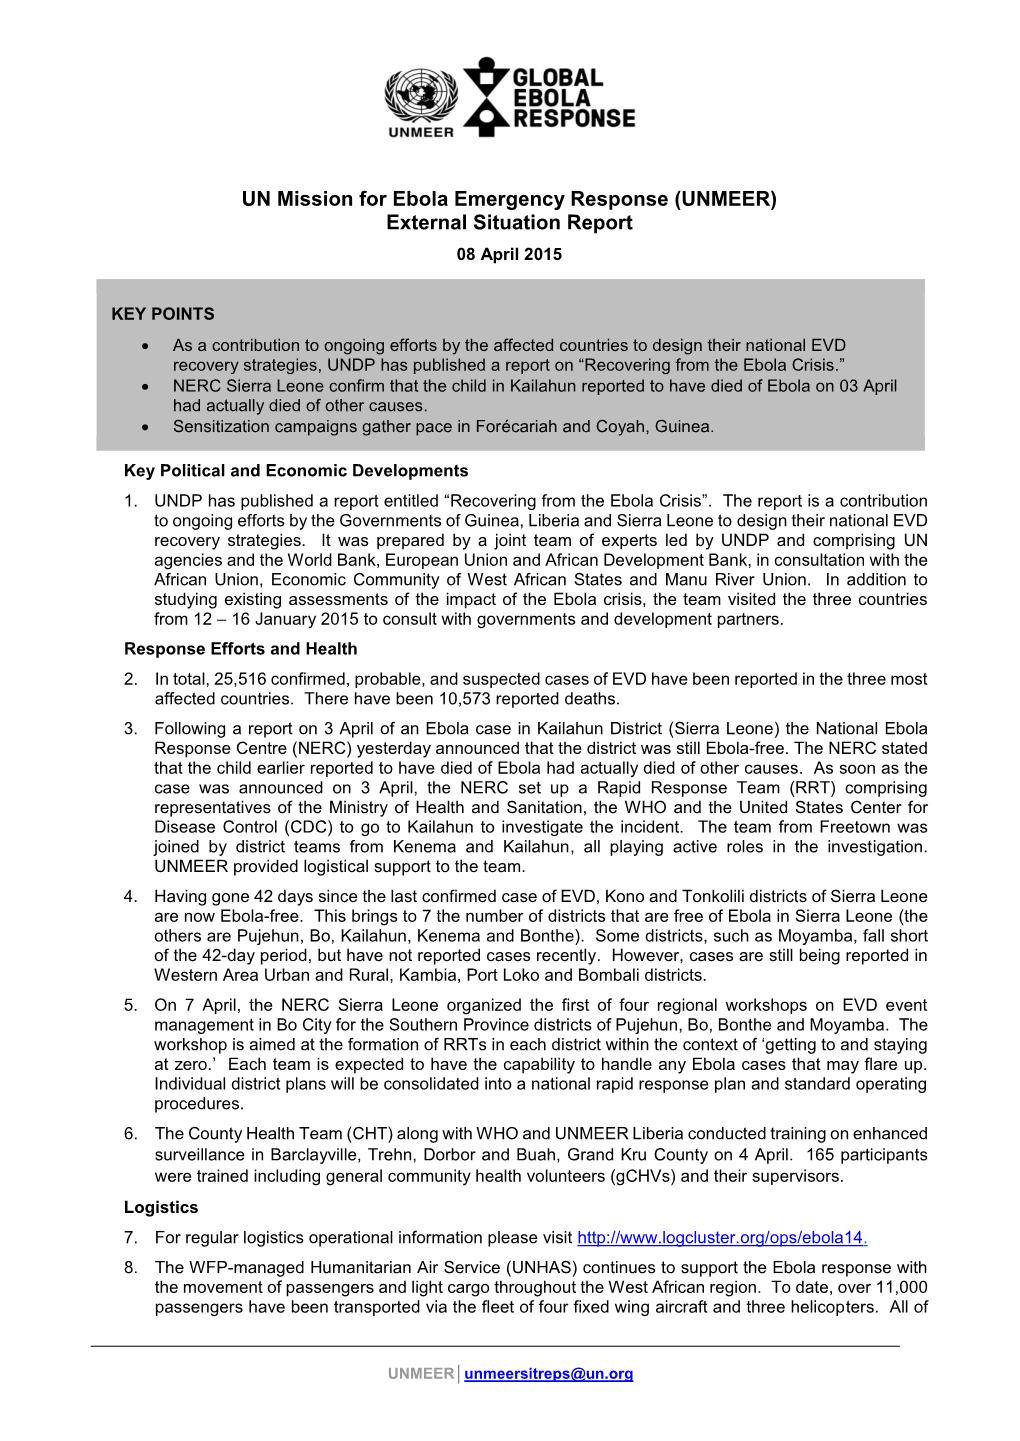 UN Mission for Ebola Emergency Response (UNMEER) External Situation Report 08 April 2015